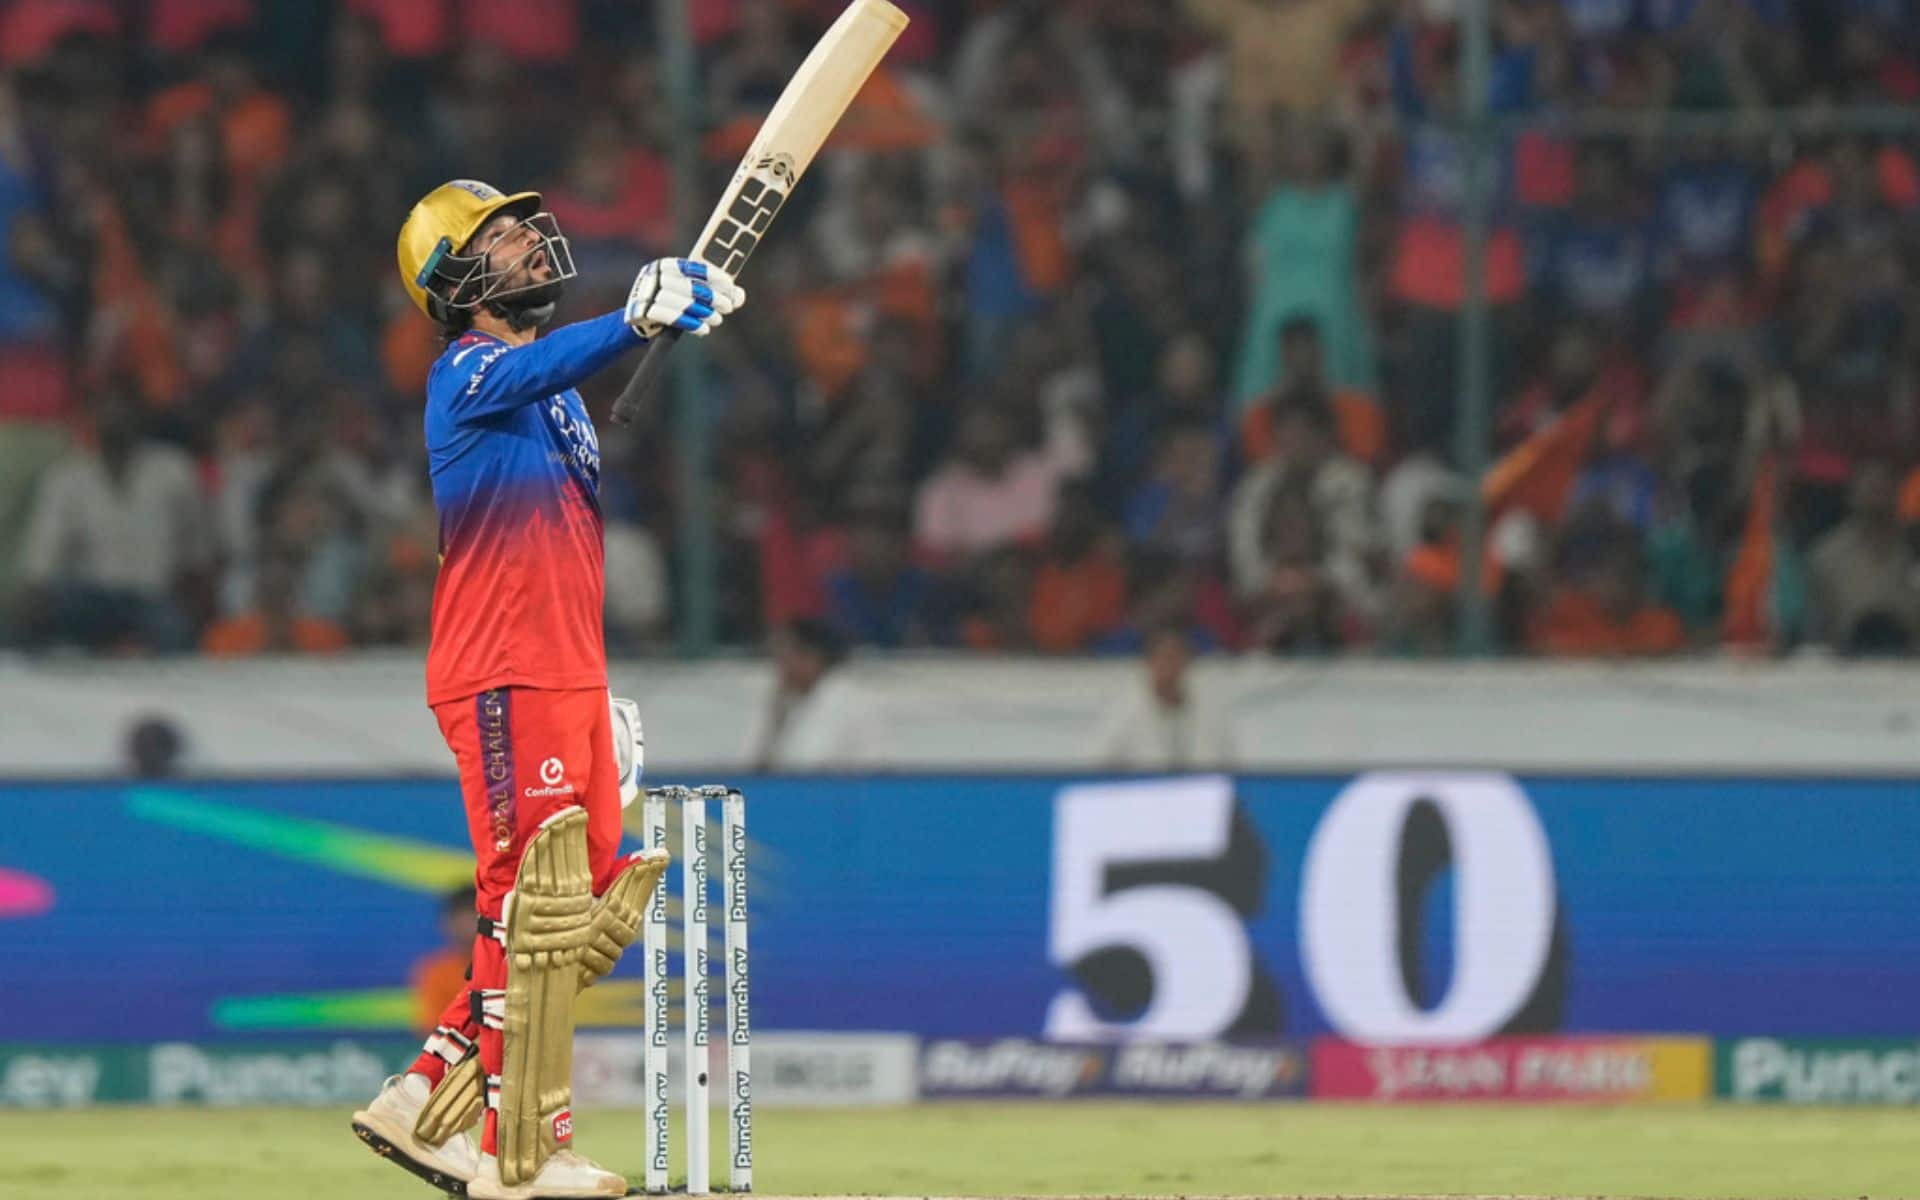 'I Try To Solve Every Problem' - Rajat Patidar After Blistering Fifty Against SRH